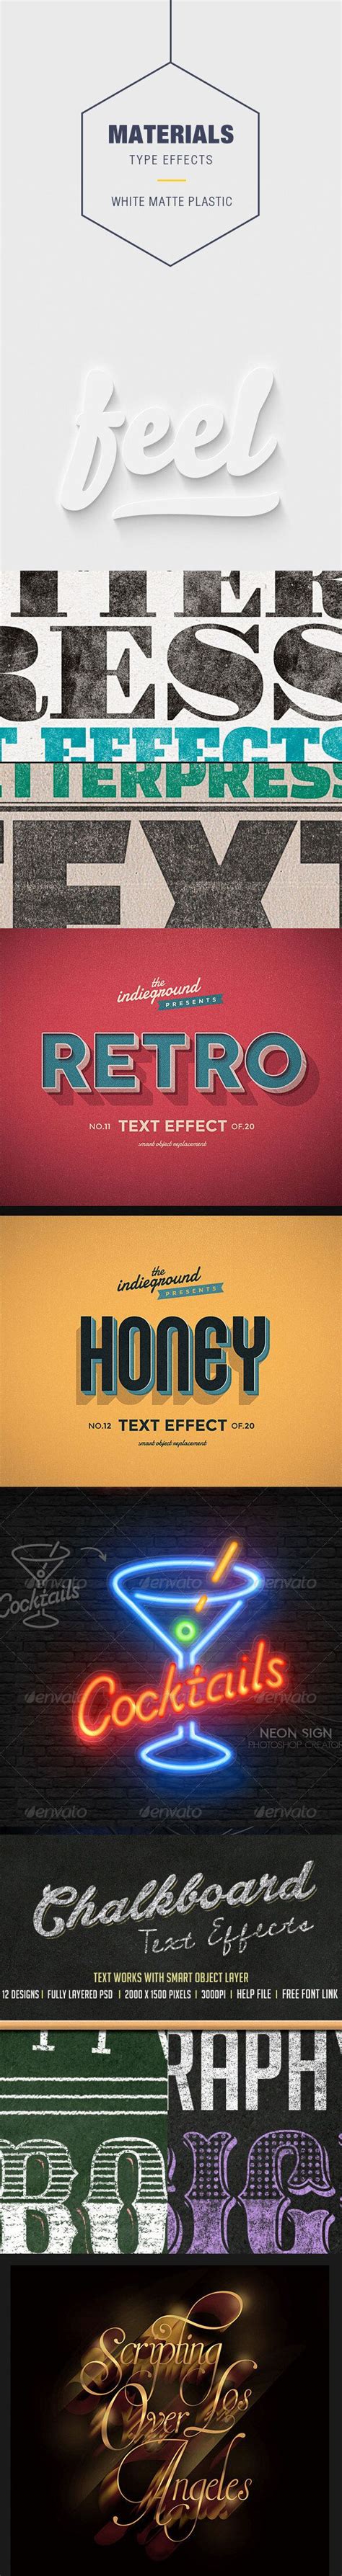 25 Best Typography Photoshop Actions And Styles Design Photoshop